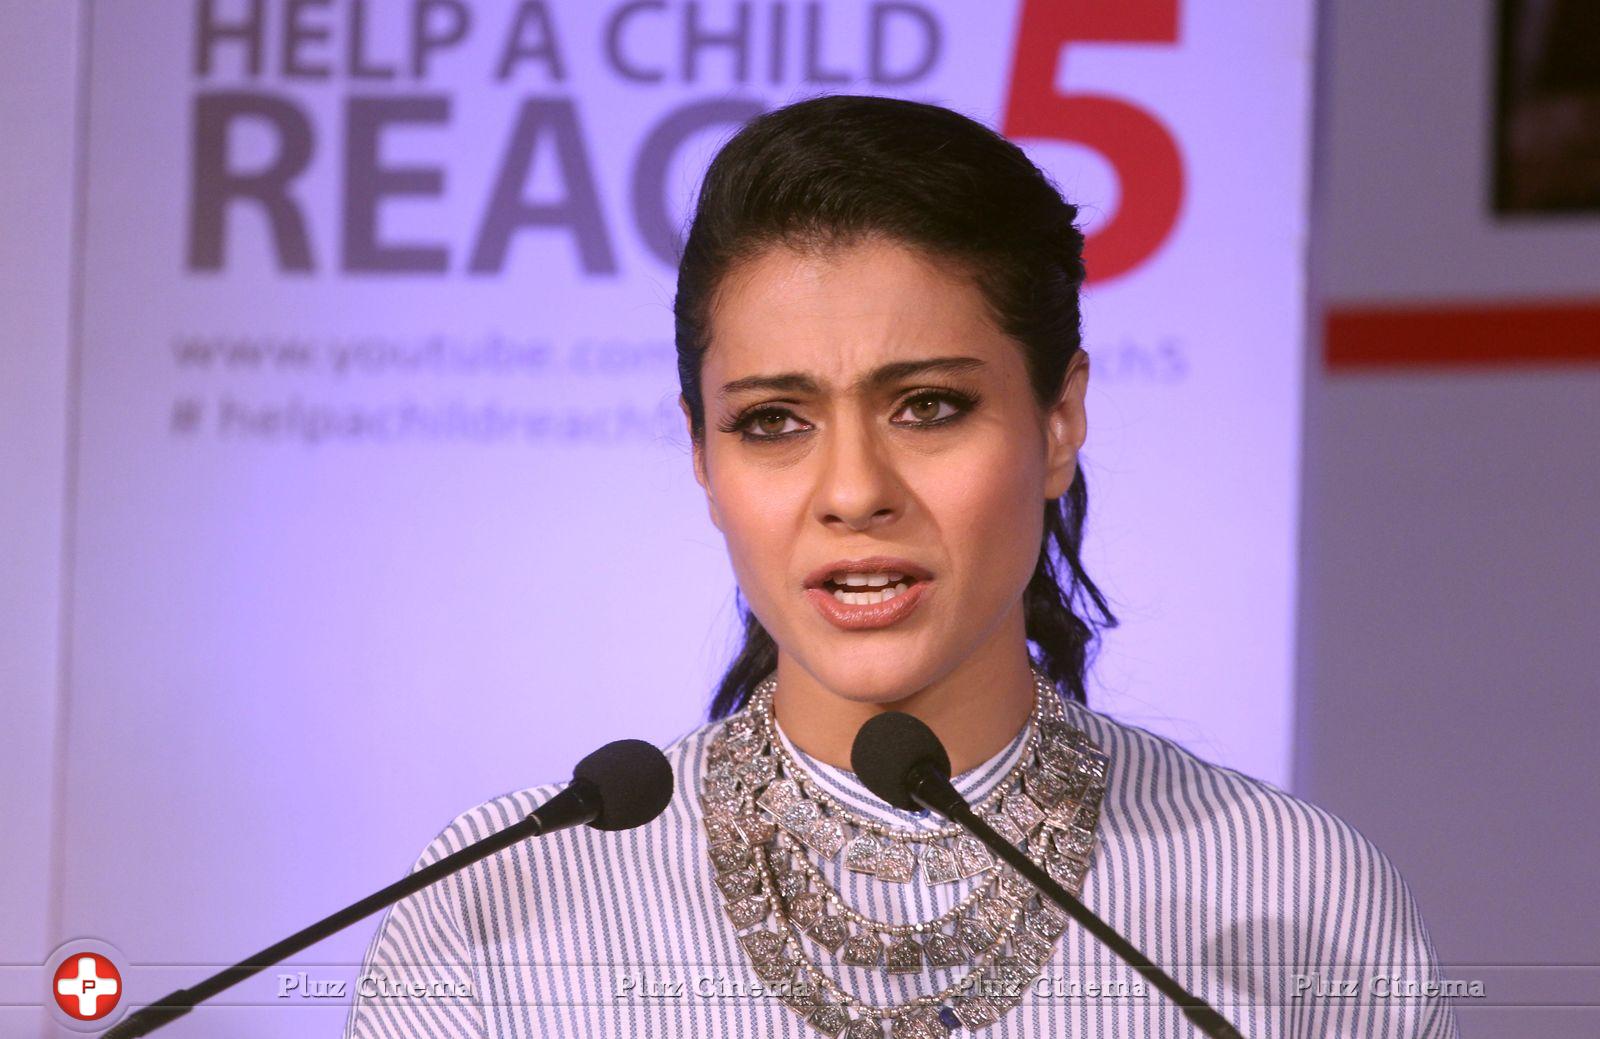 Kajol - Kajol at The Announcement of help a Child Research 5 hand washing programme Photos | Picture 730636